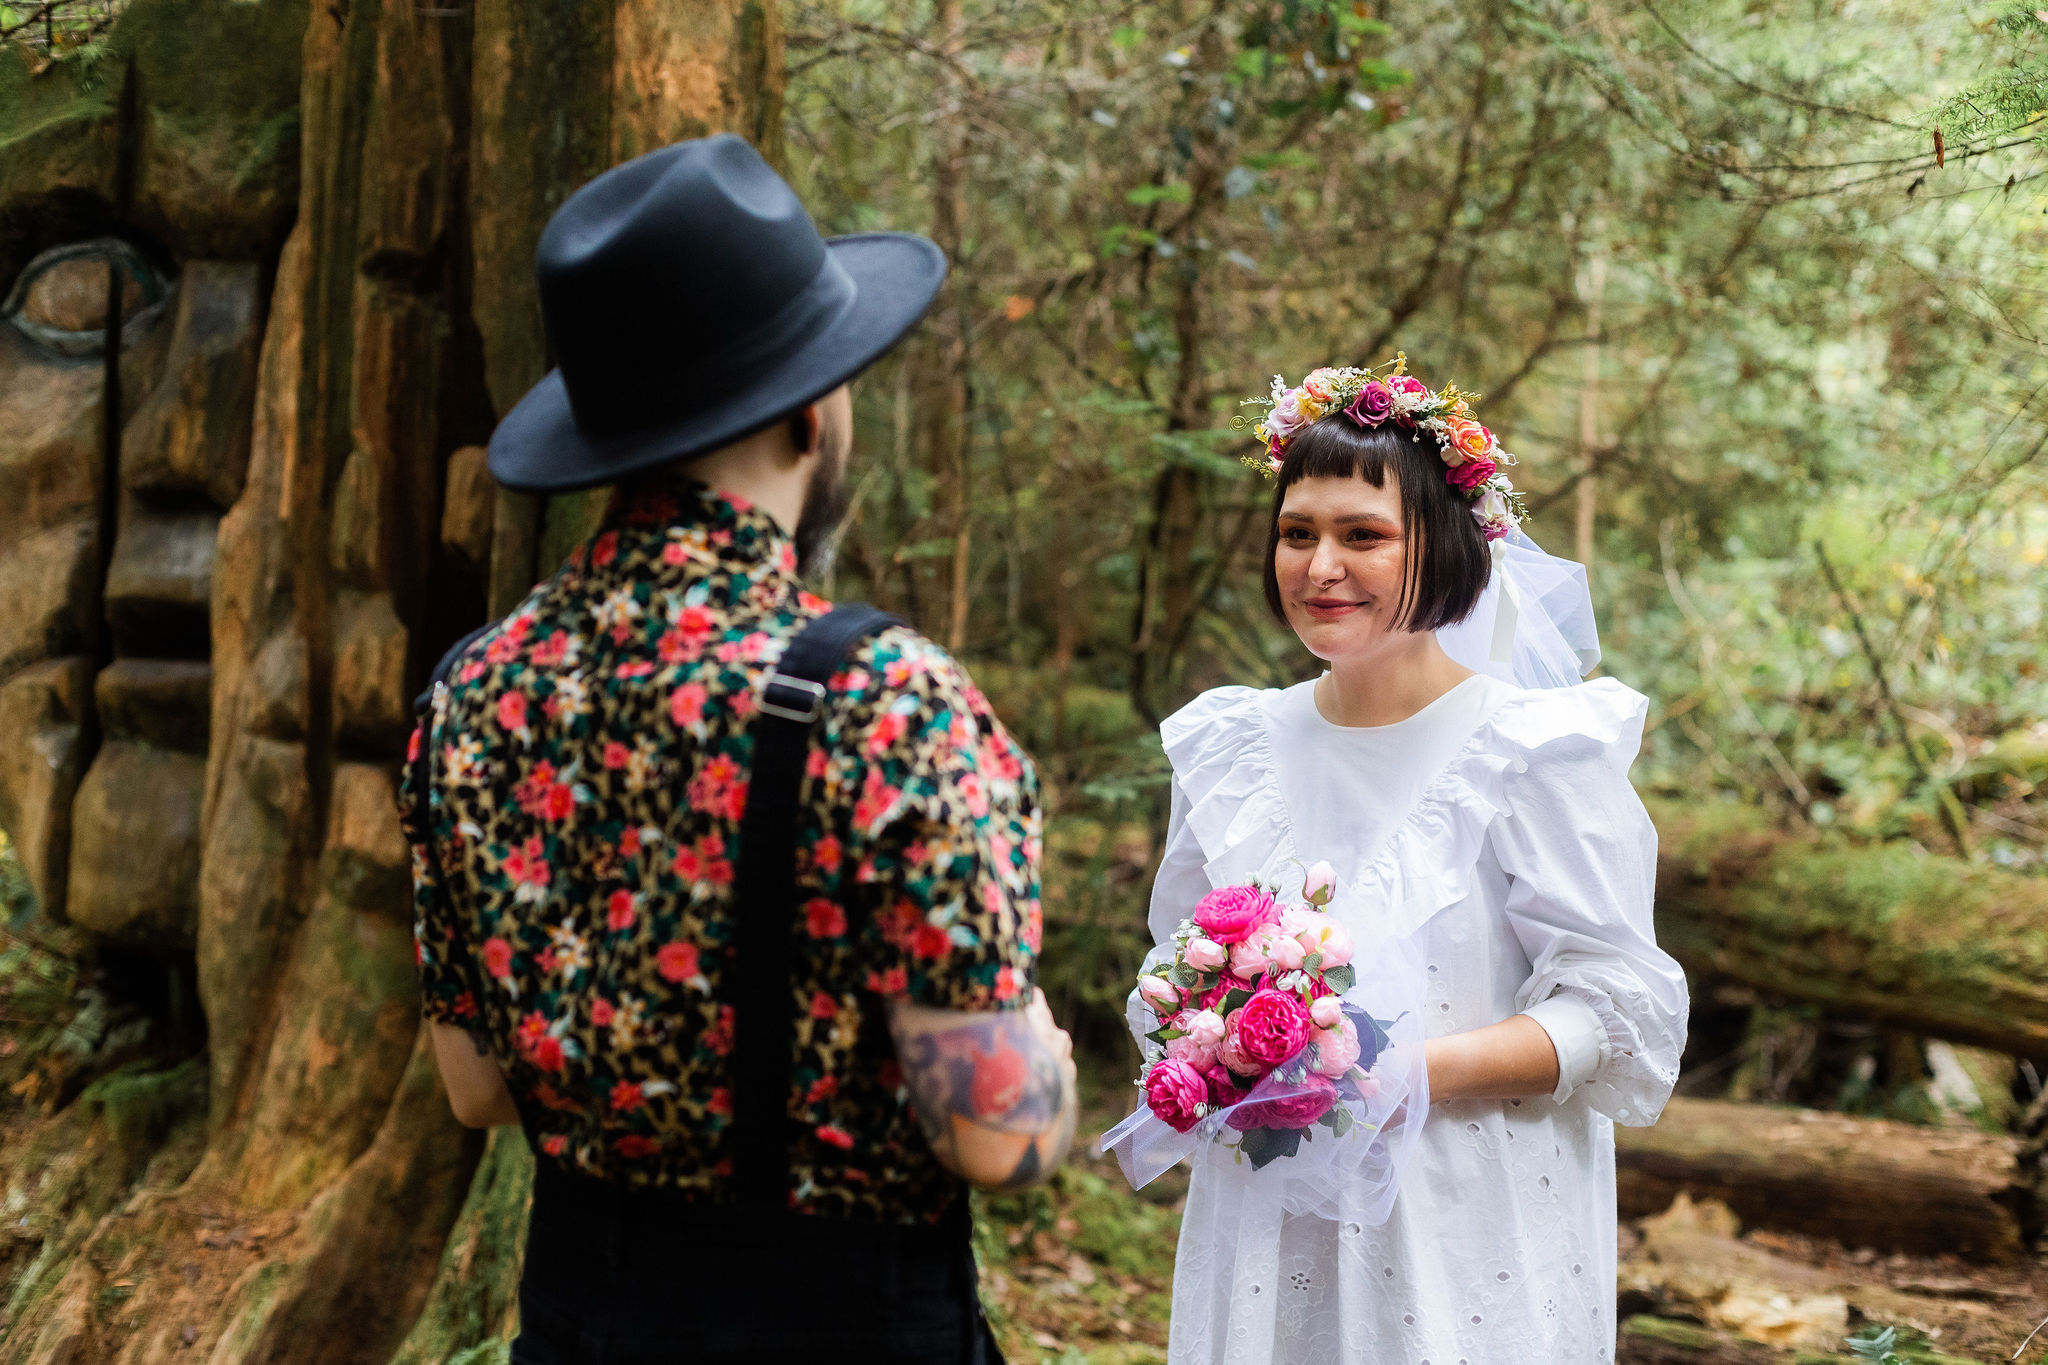 fun wedding officiant script at young hip and married vancouver elopement